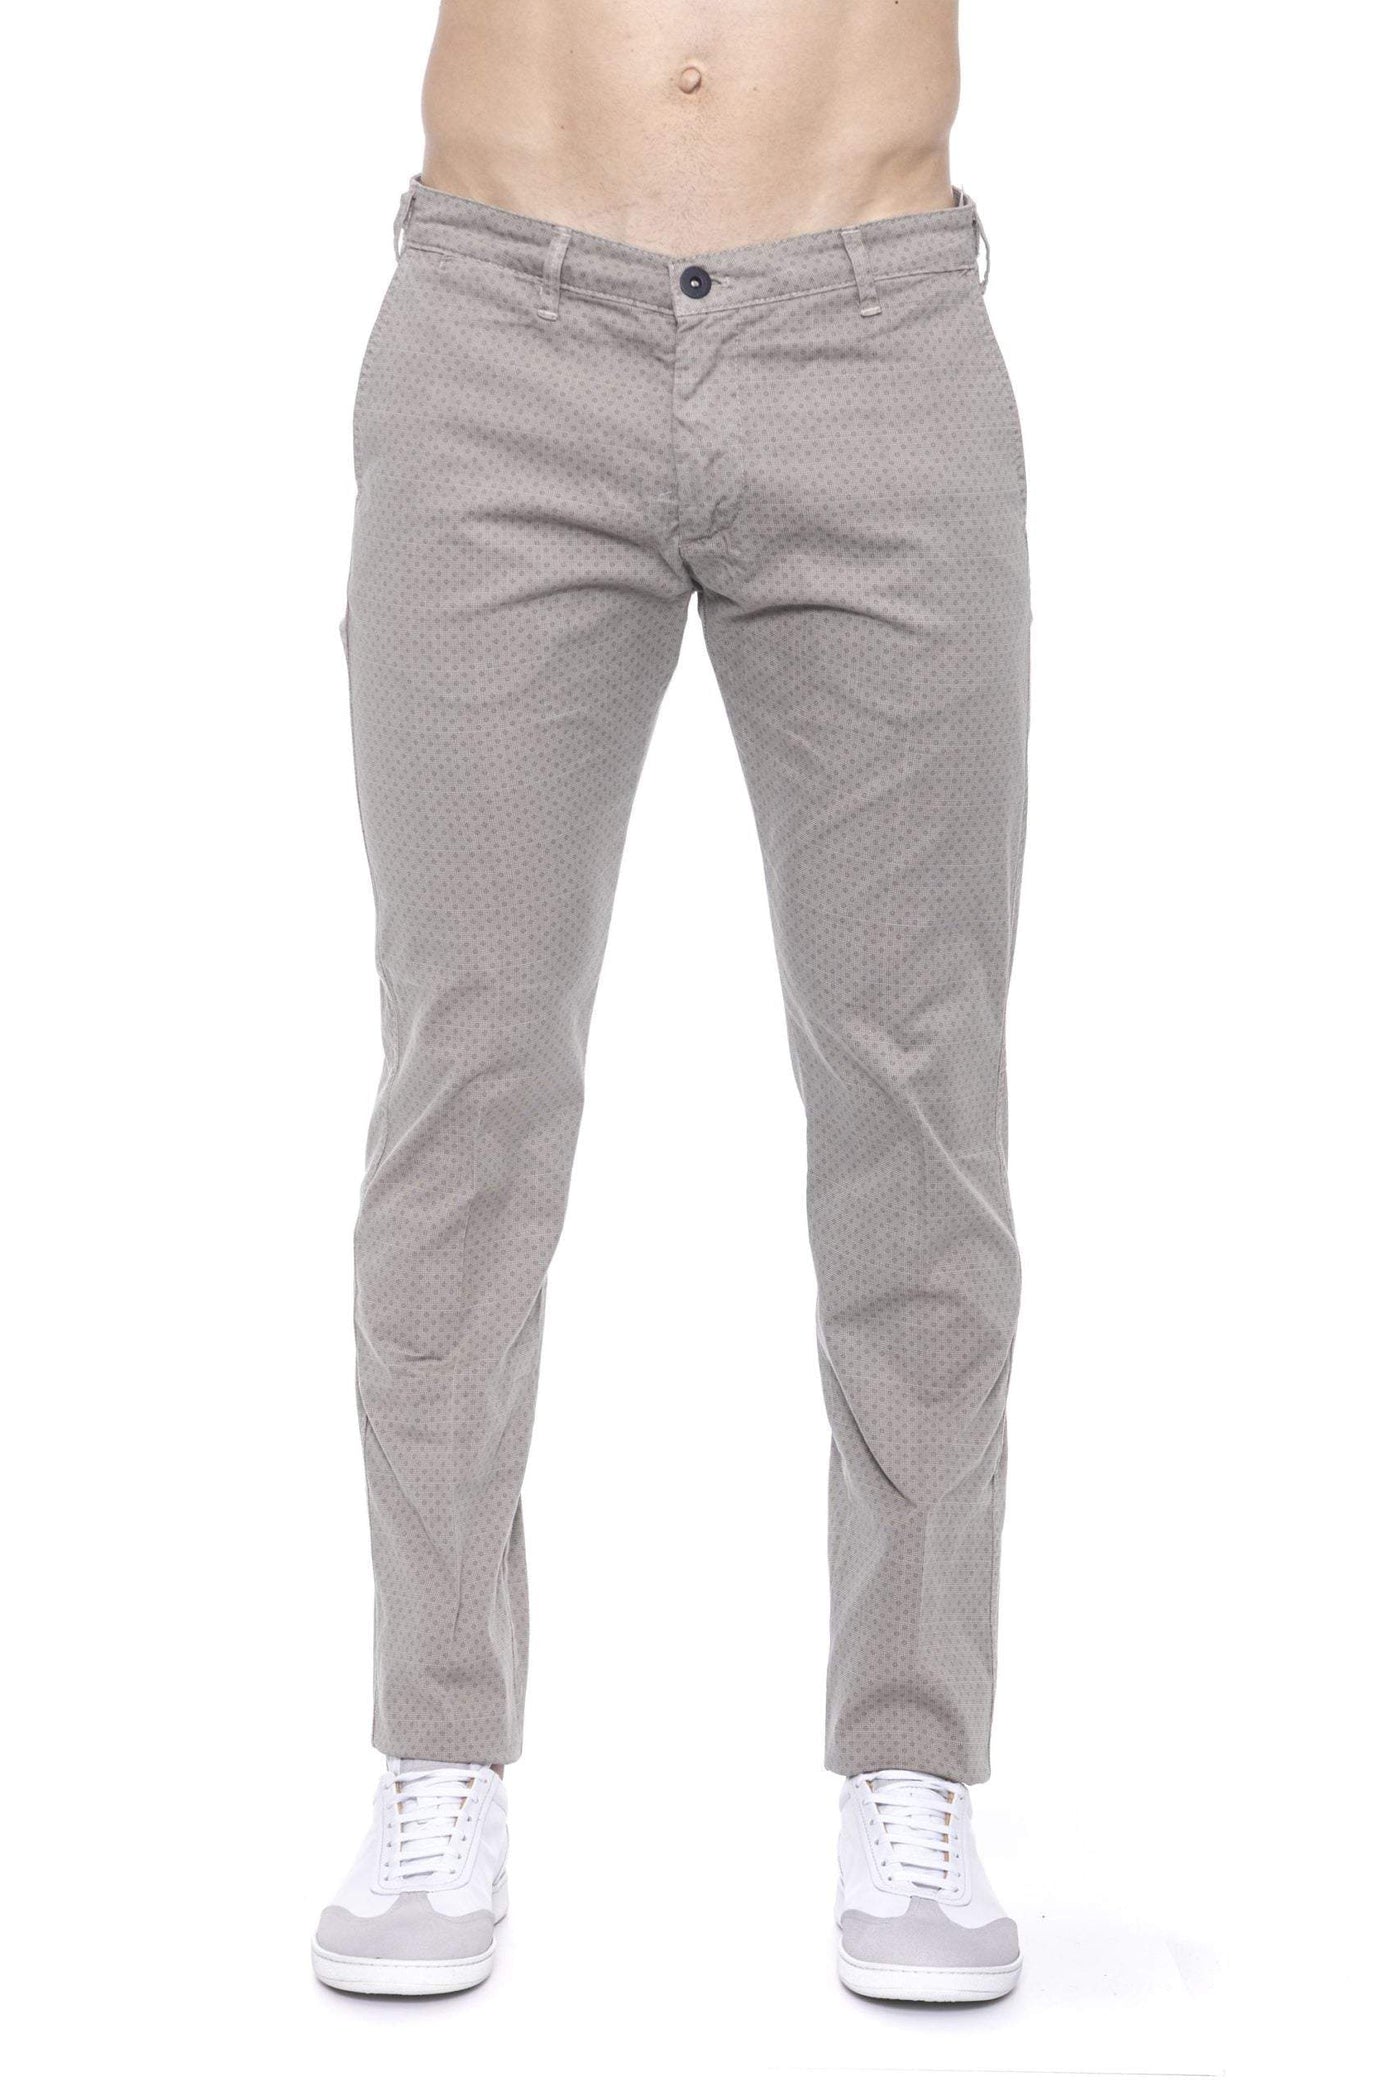 Armata Di Mare zipped and buttoned Jeans & Pant #men, Armata Di Mare, Beige, feed-agegroup-adult, feed-color-Beige, feed-gender-male, IT46 | S, IT48 | M, IT54 | XL, IT56 | XXL, IT58 | 3XL, Jeans & Pants - Men - Clothing at SEYMAYKA